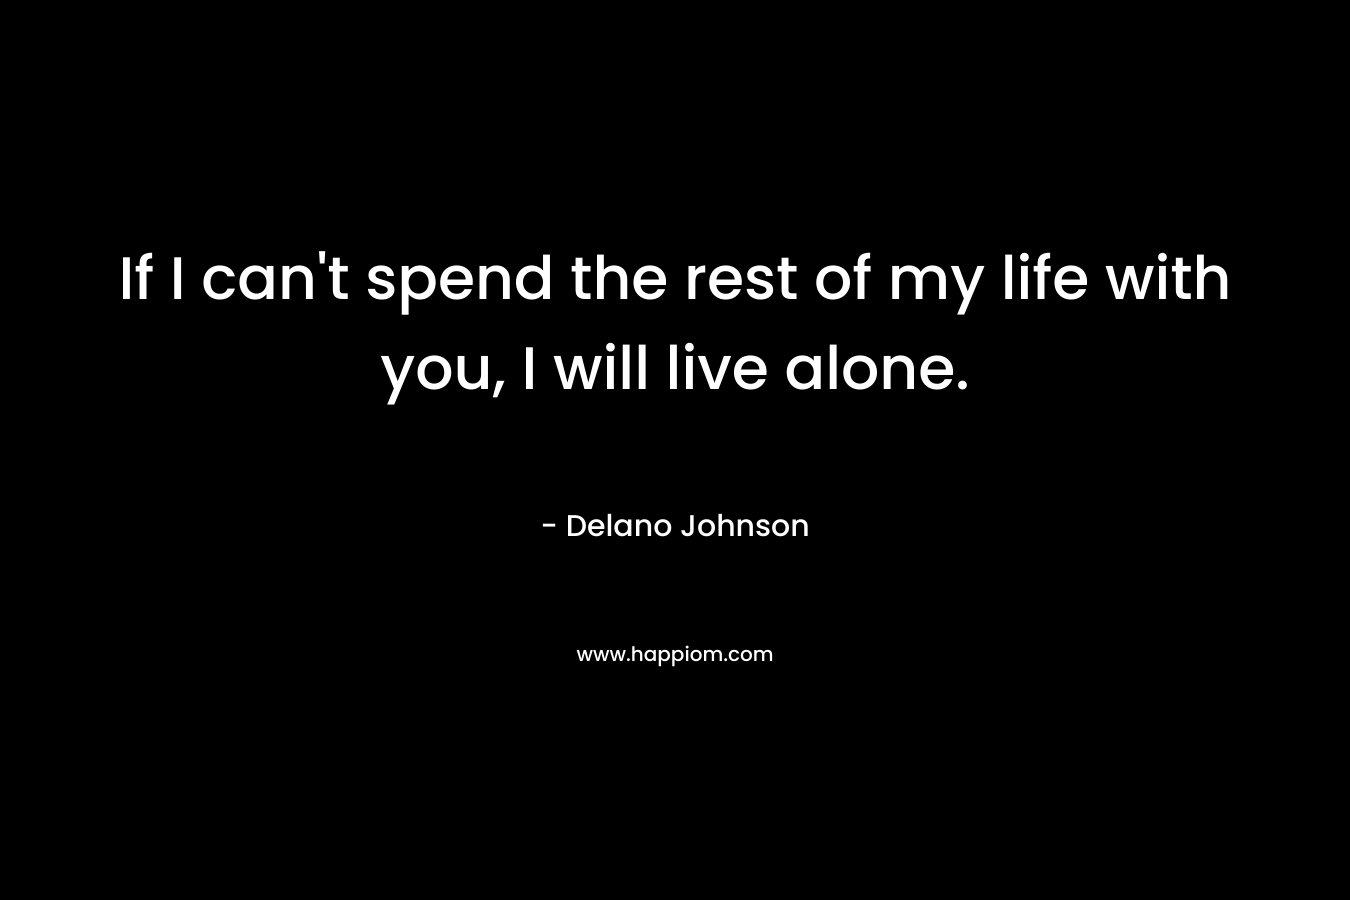 If I can’t spend the rest of my life with you, I will live alone. – Delano Johnson